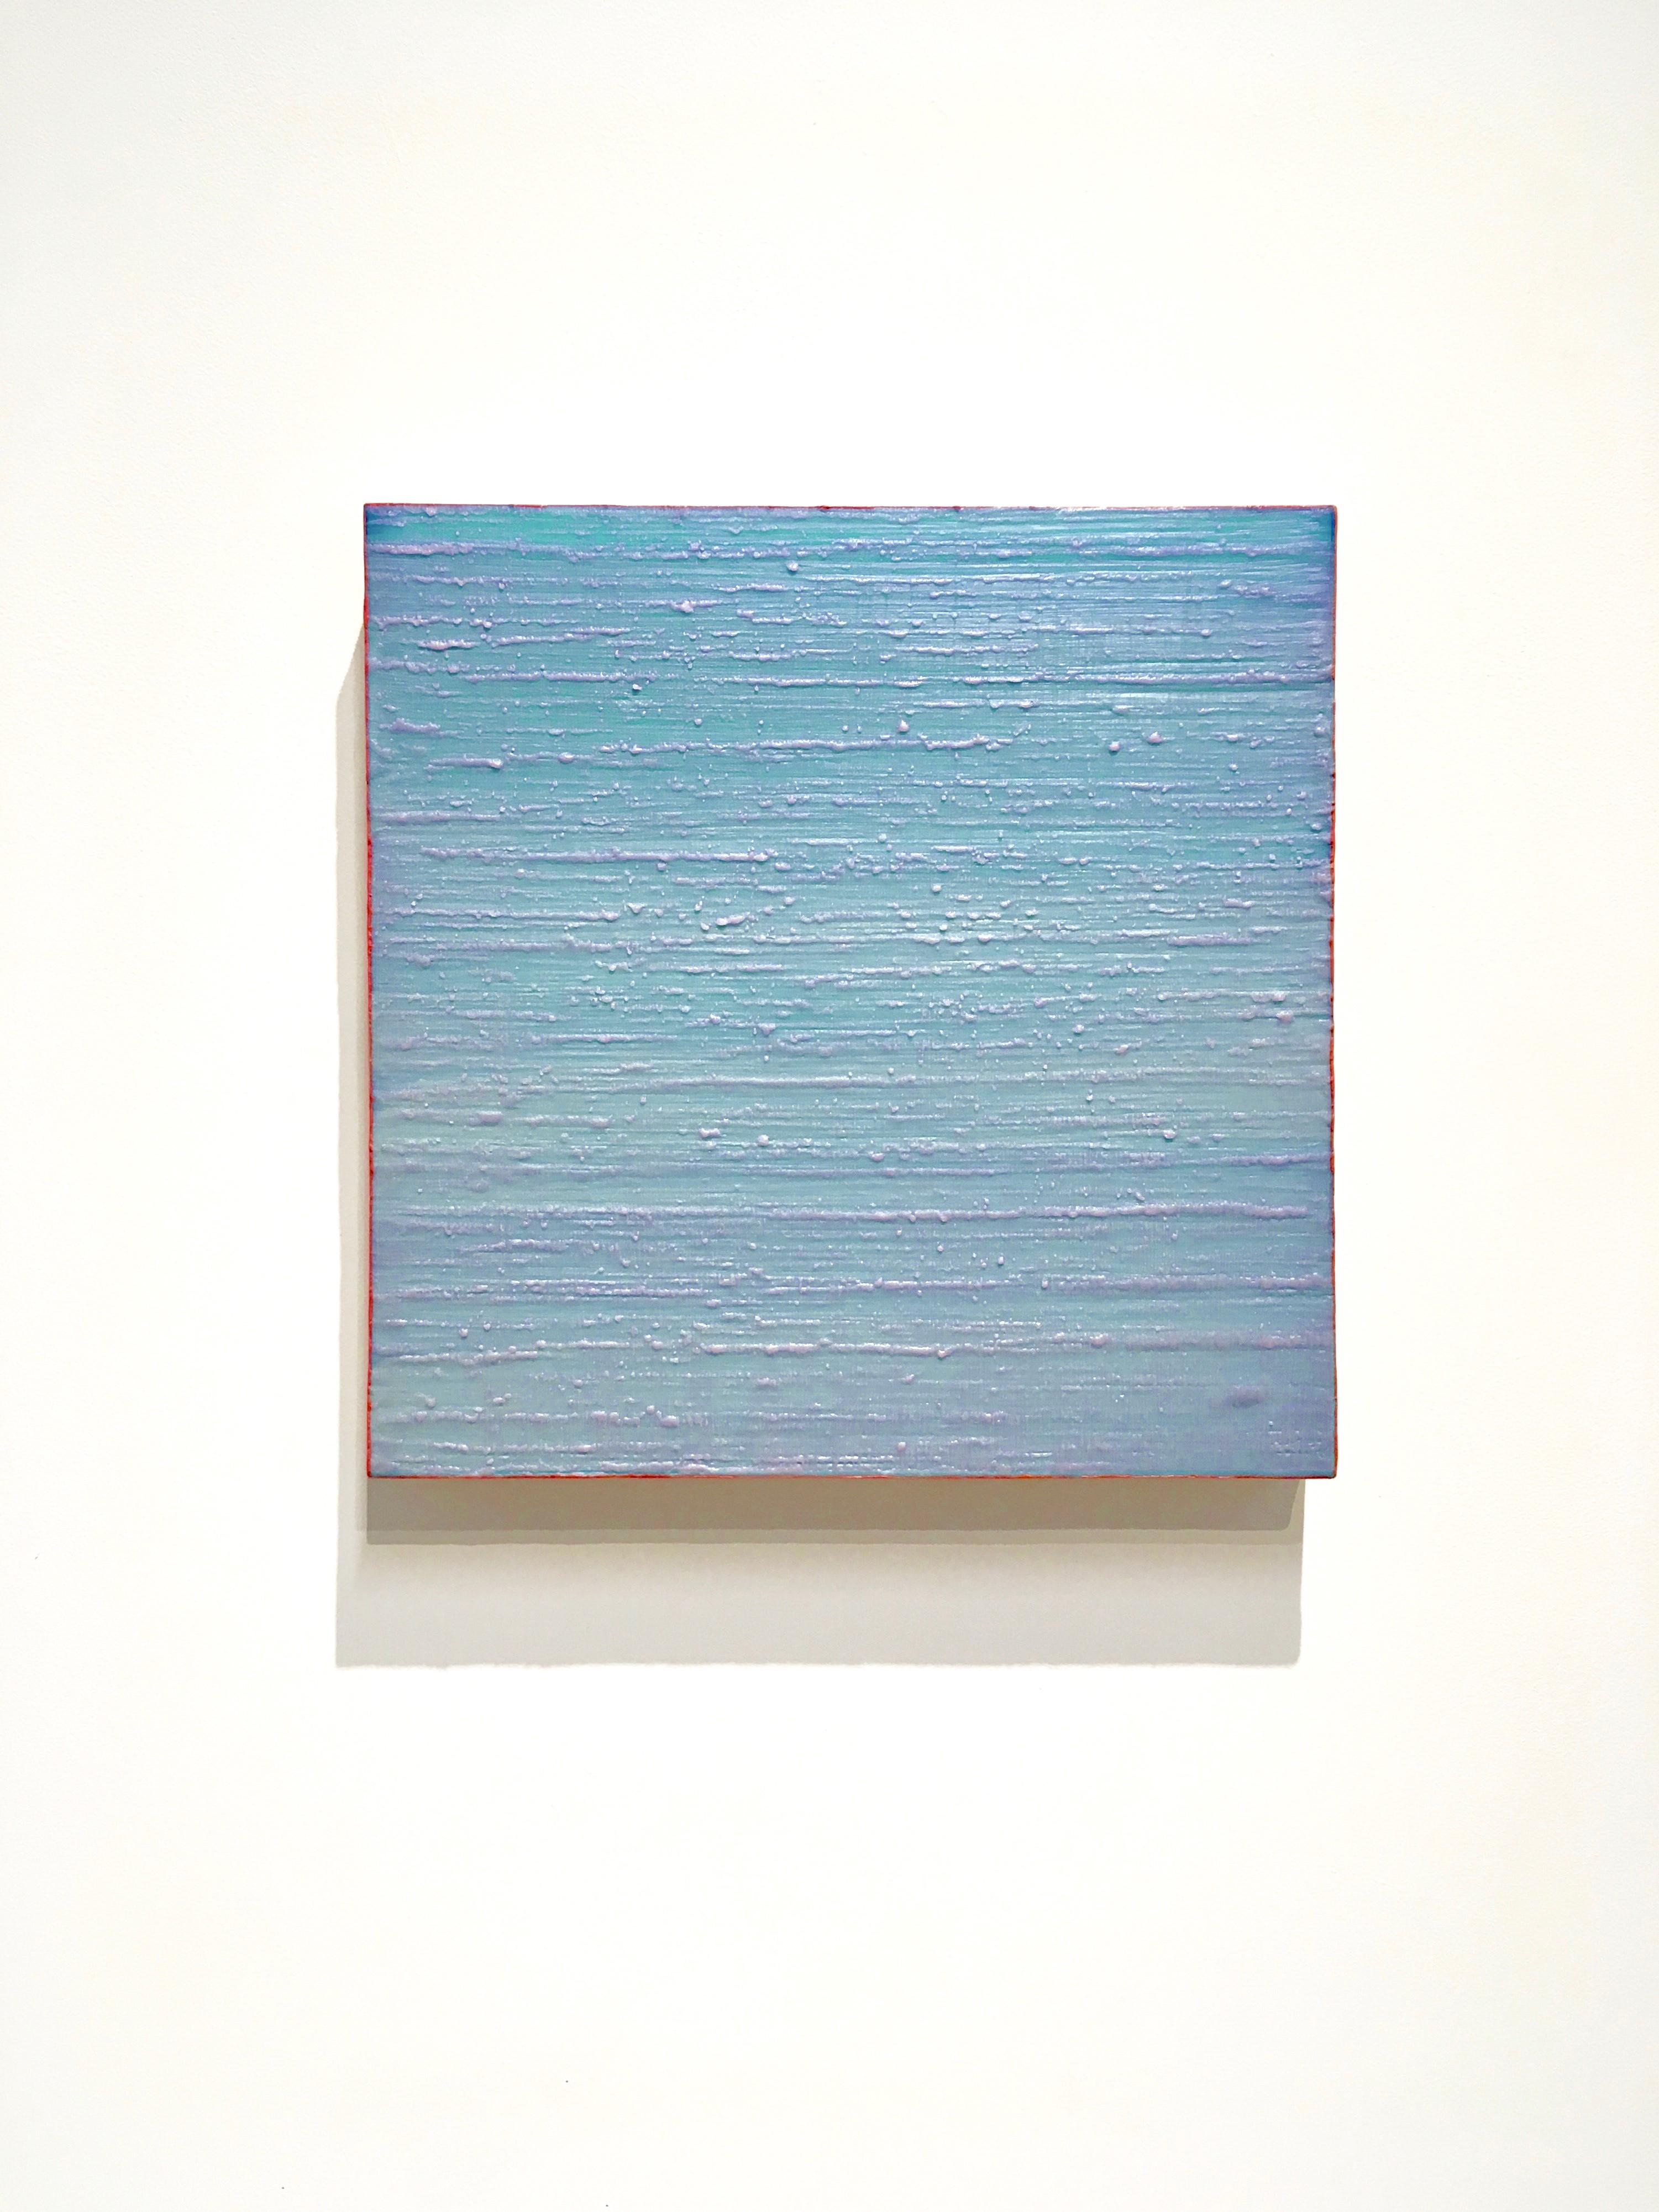 A luminous pale blue encaustic (pigmented beeswax) painting on birch panel accented with bright coral along the edge of the panel. Signed, dated and titled on verso.

Joanne Mattera’s paintings can be described as lush minimalism, the work is